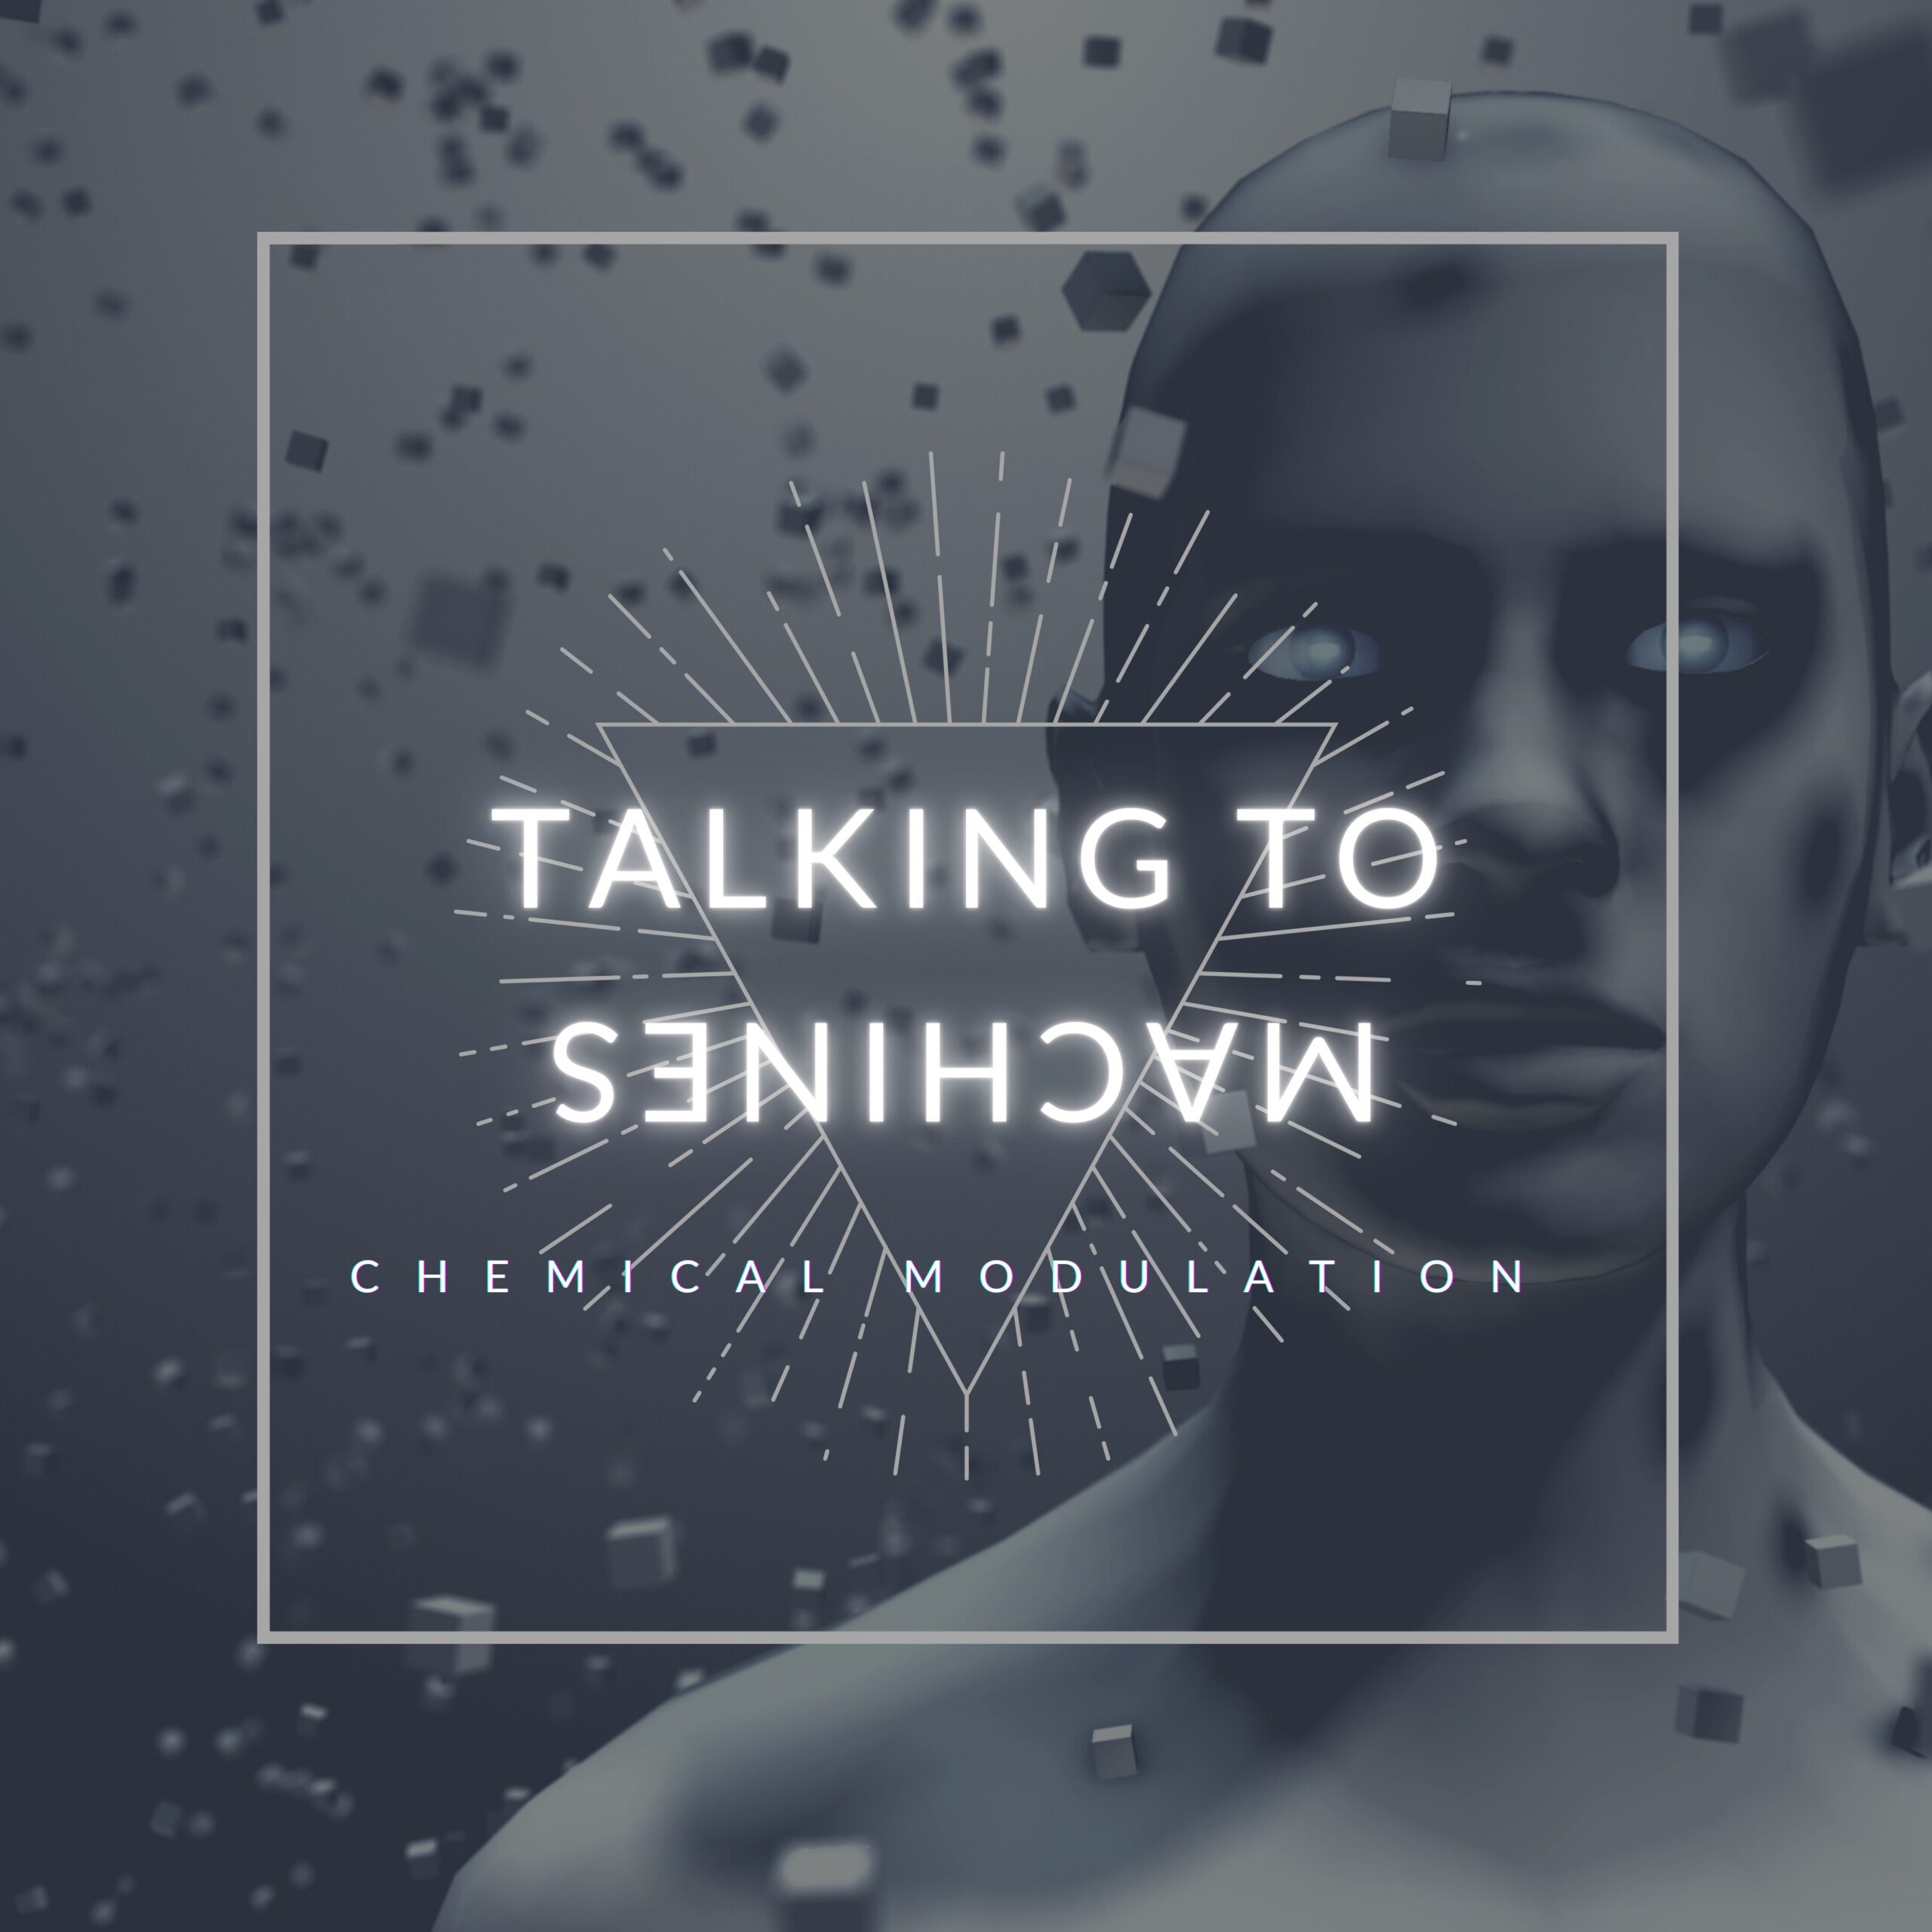 Talking to Machines is out